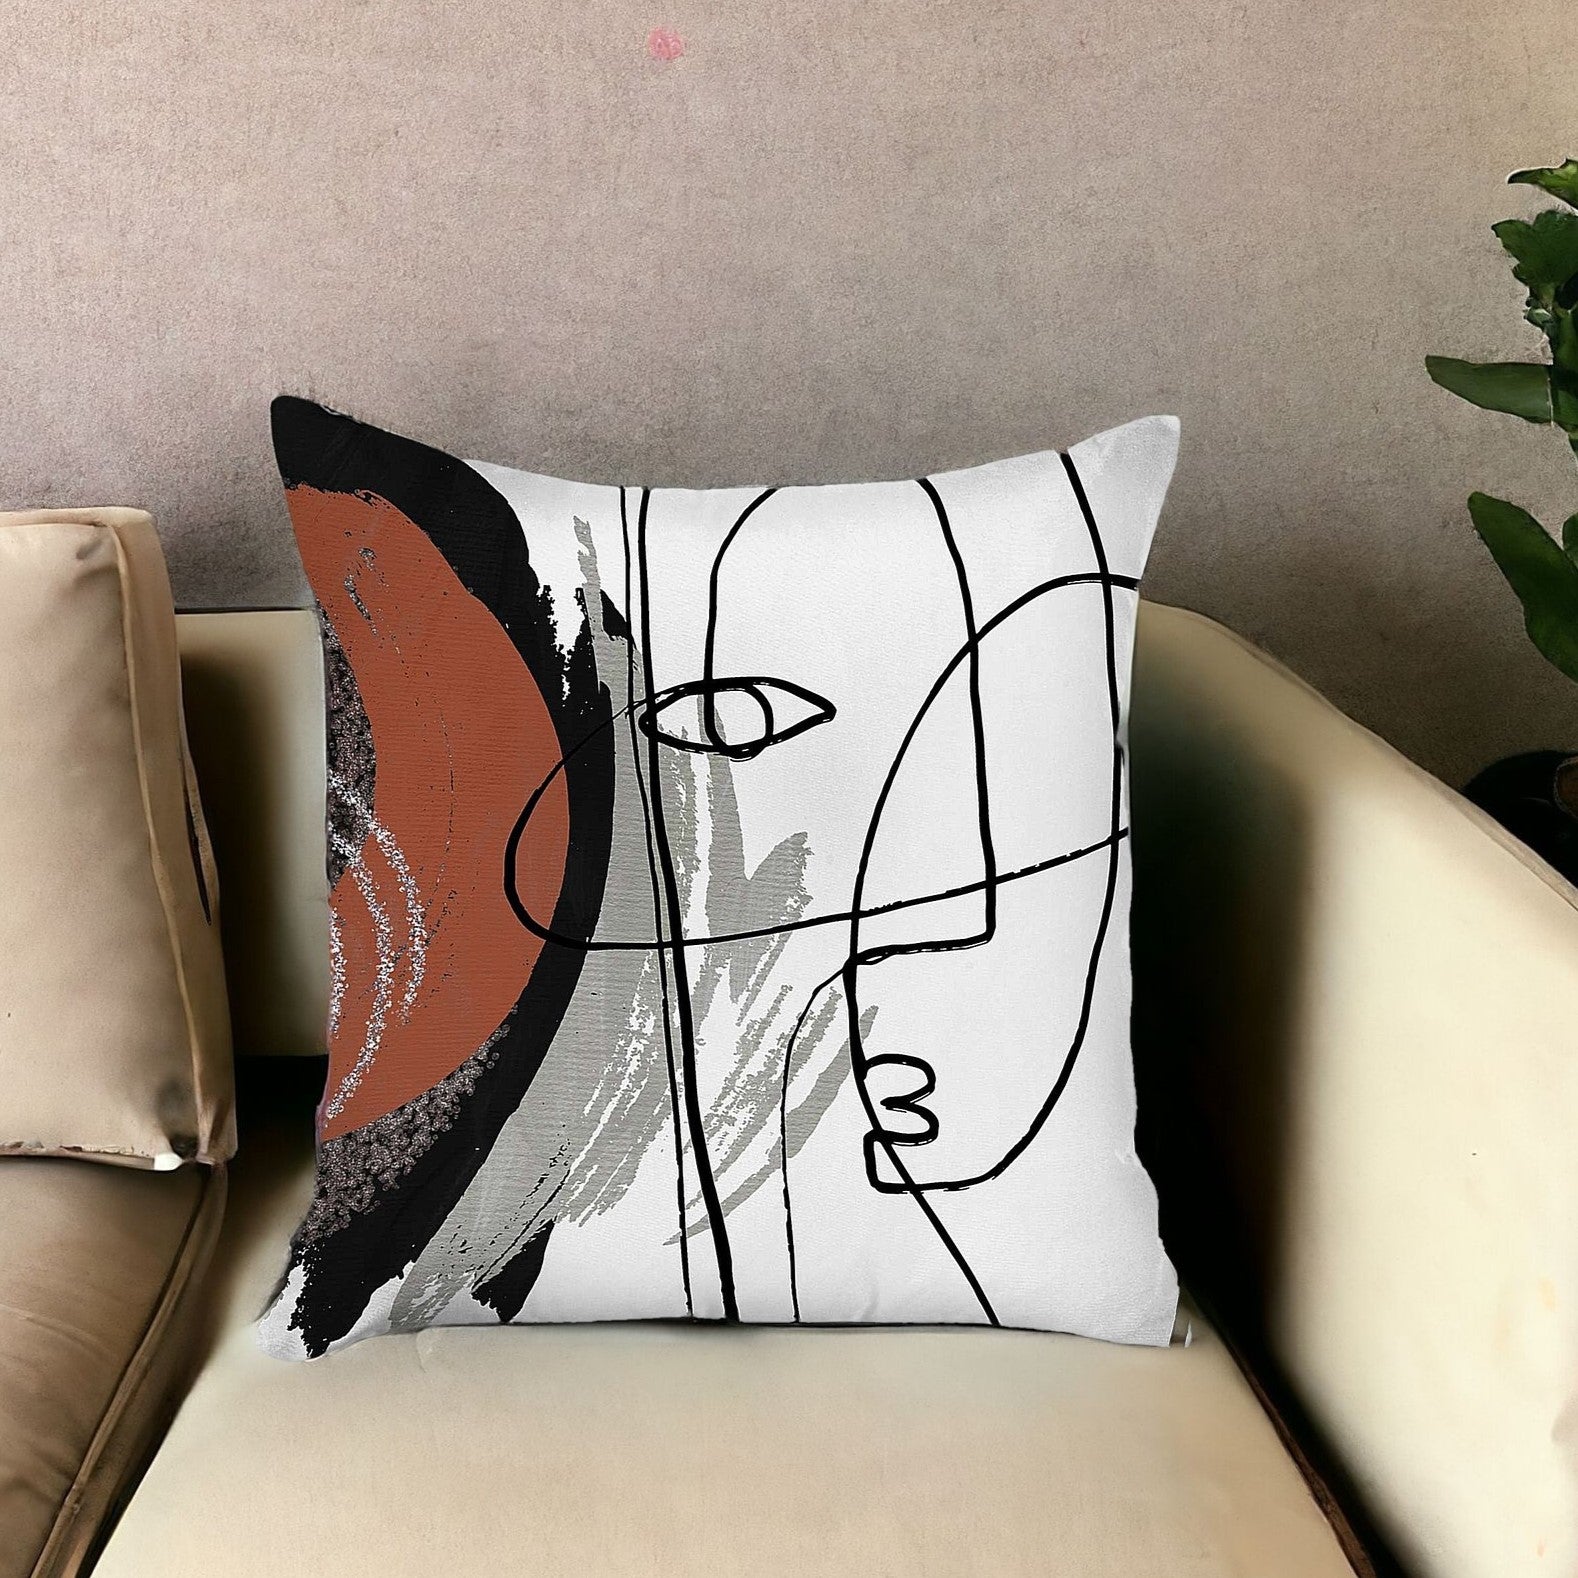 18" X 18" Black And Red Abstract Zippered Handmade Polyester Throw Pillow Cover